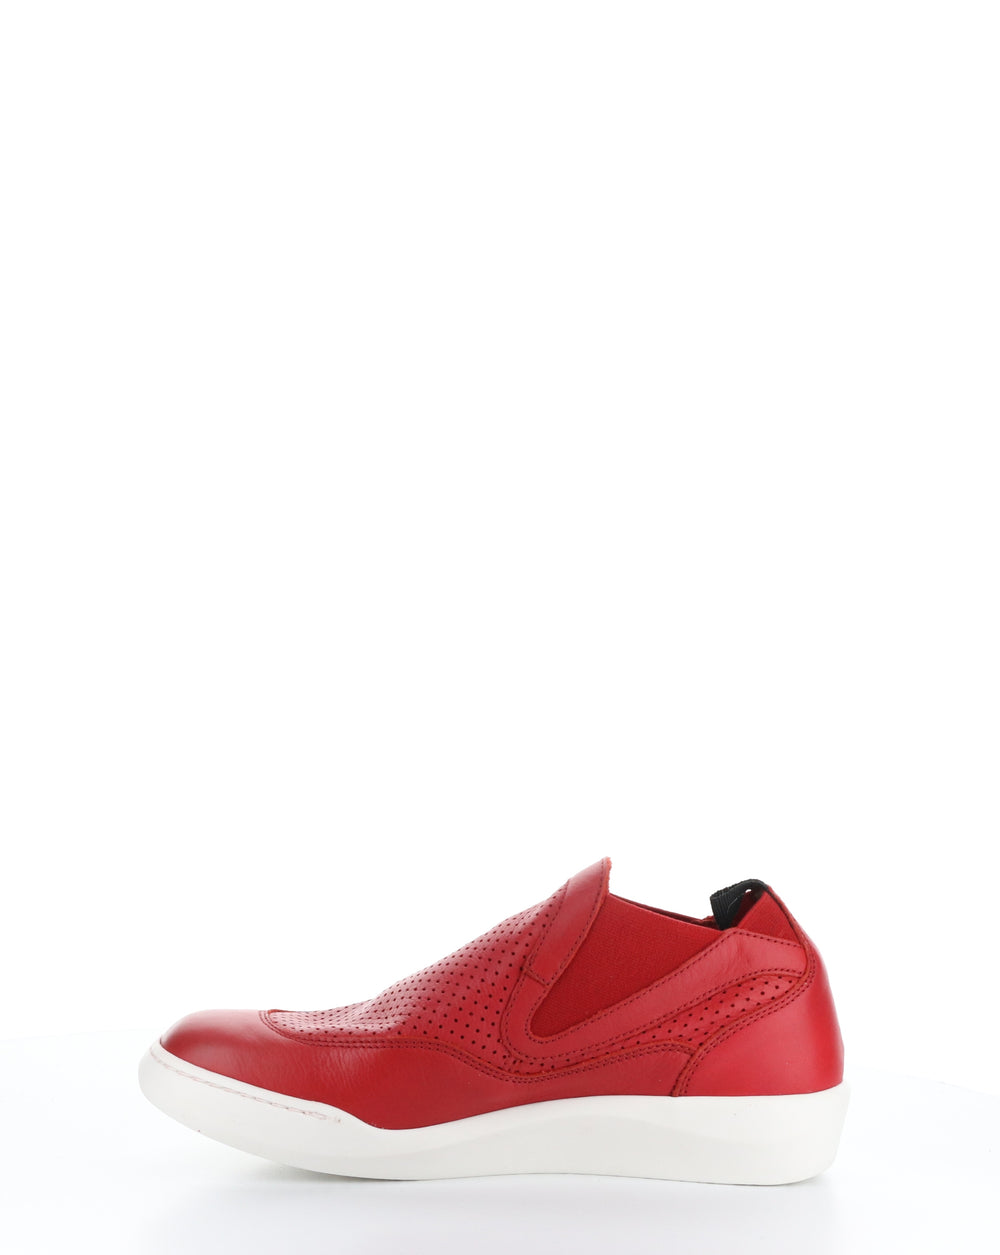 BRAY721SOF 002 CHERRY RED Elasticated Shoes